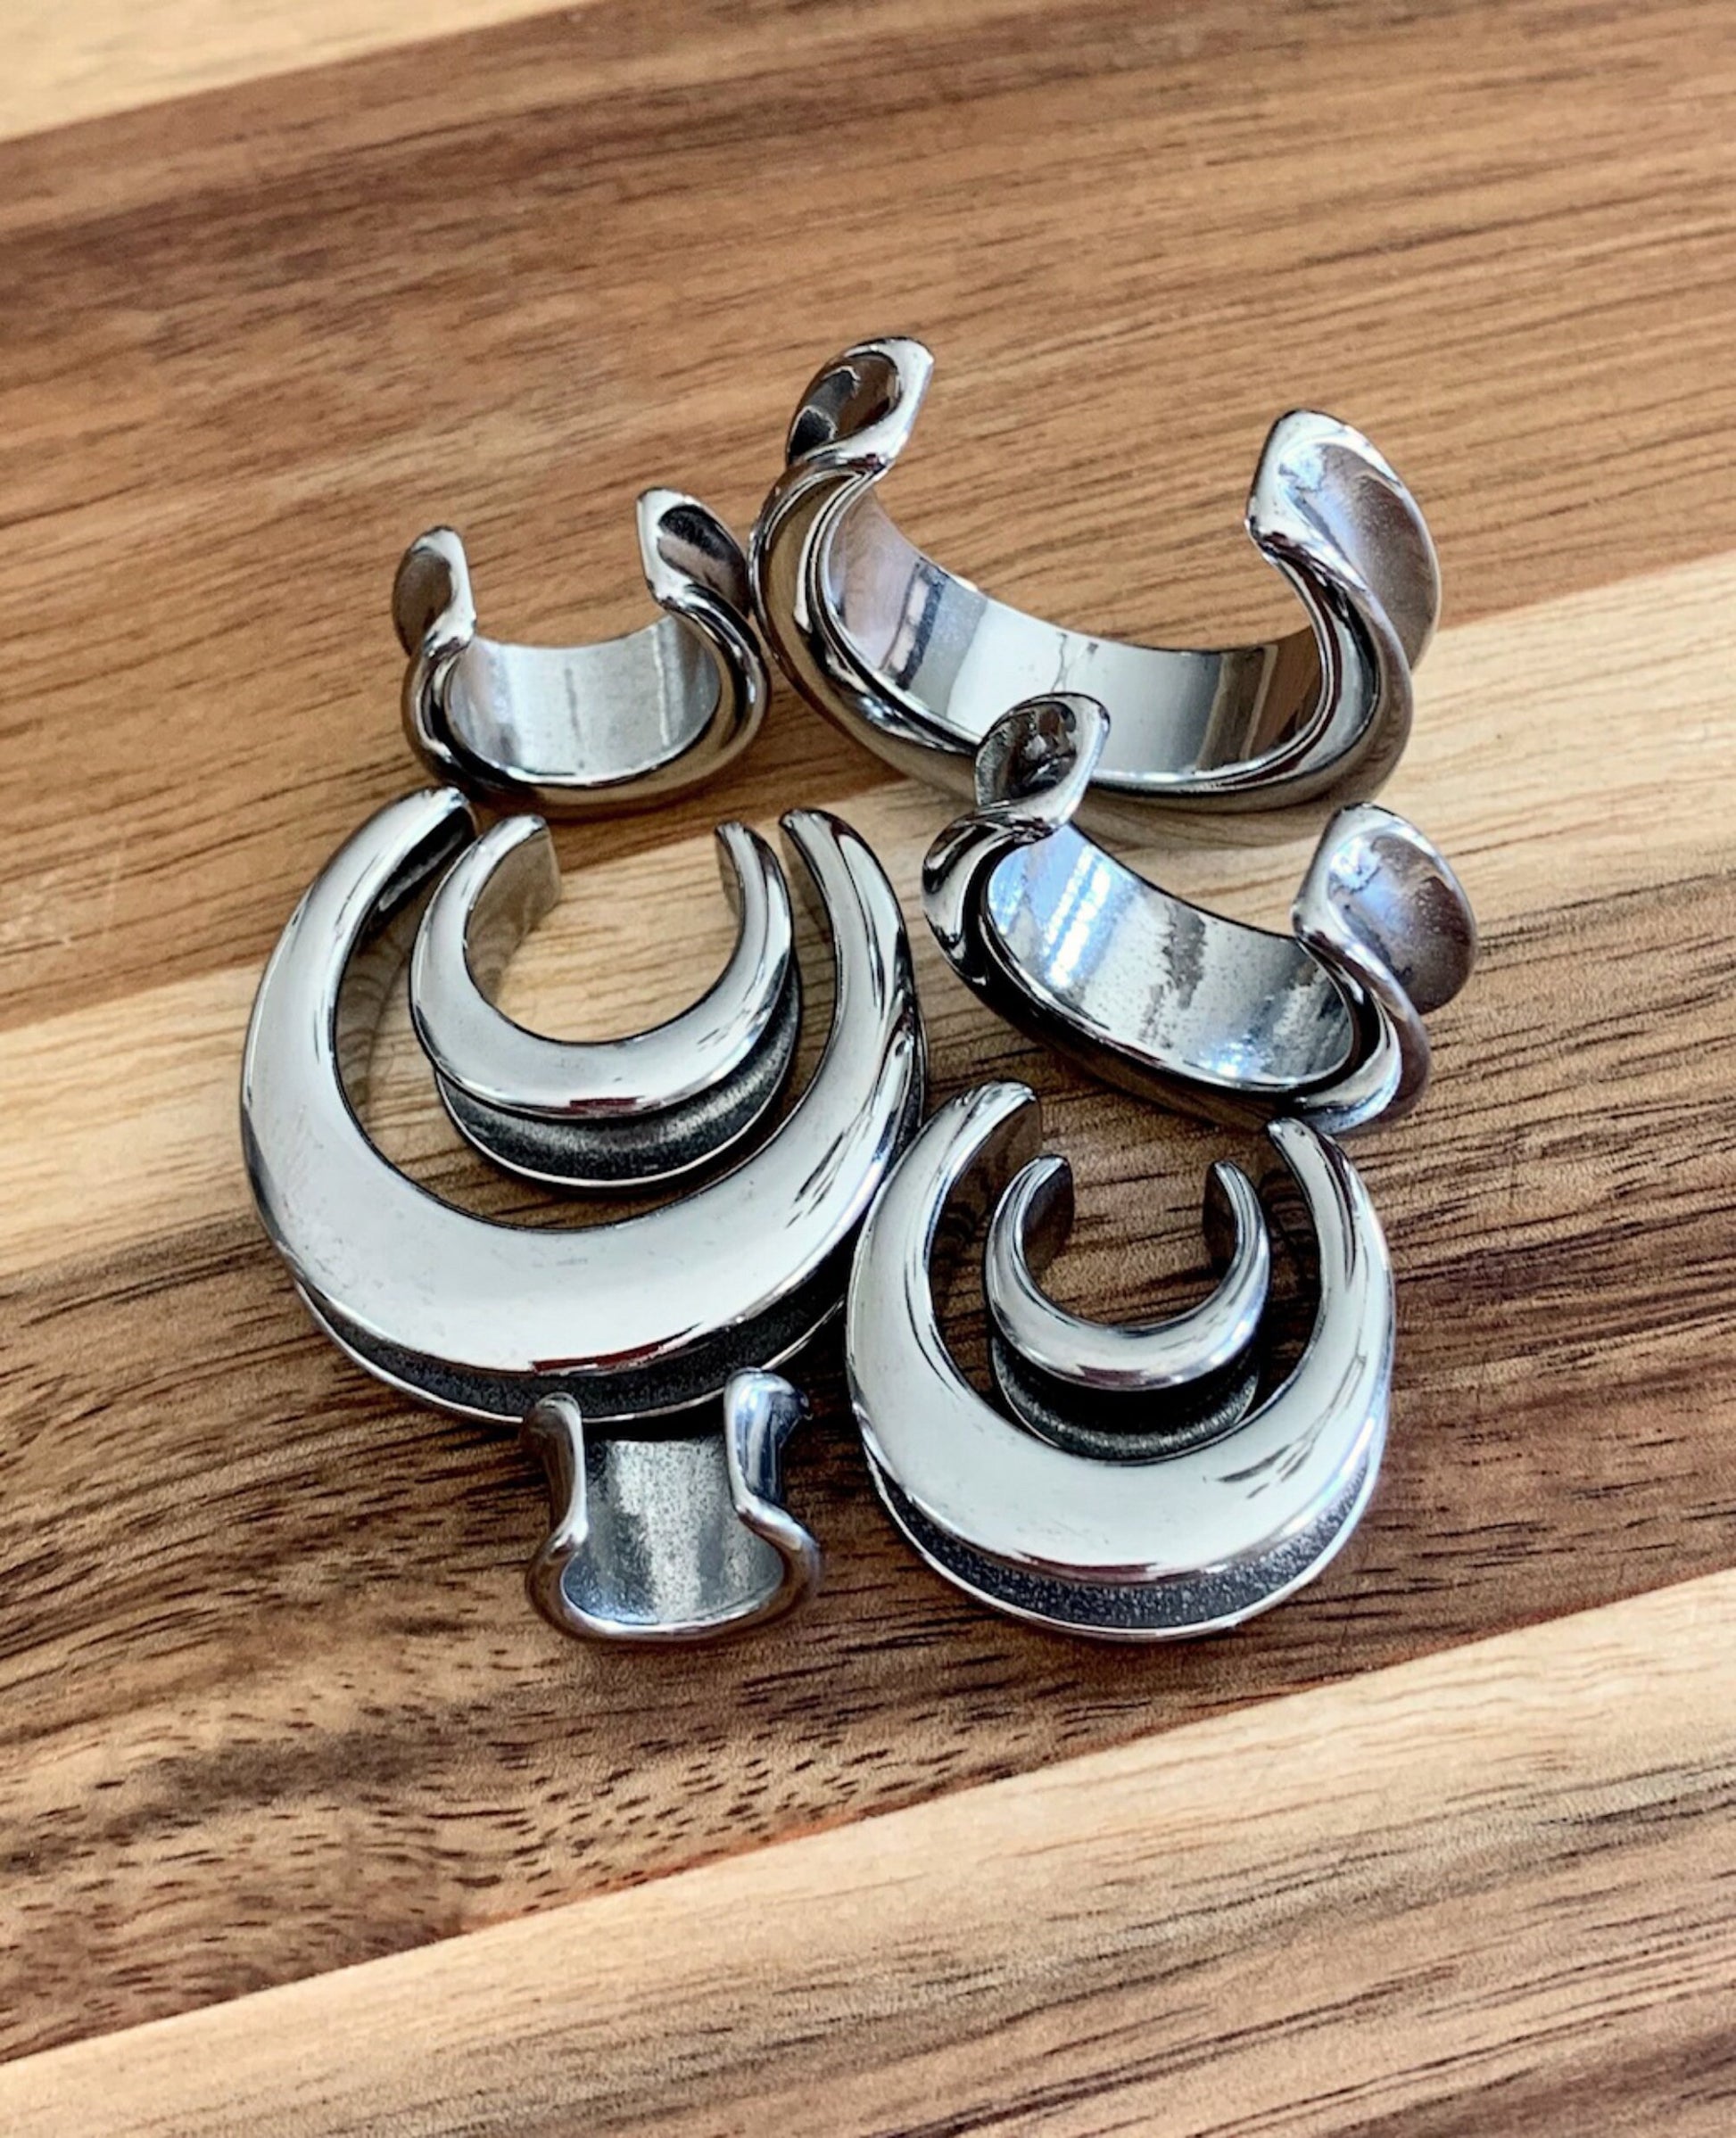 PAIR of Unique Saddle Surgical Steel Ear Spreaders Silver Hanger-Tunnels/Plugs - Gauges 00g (10mm) thru 1" (25mm) available!